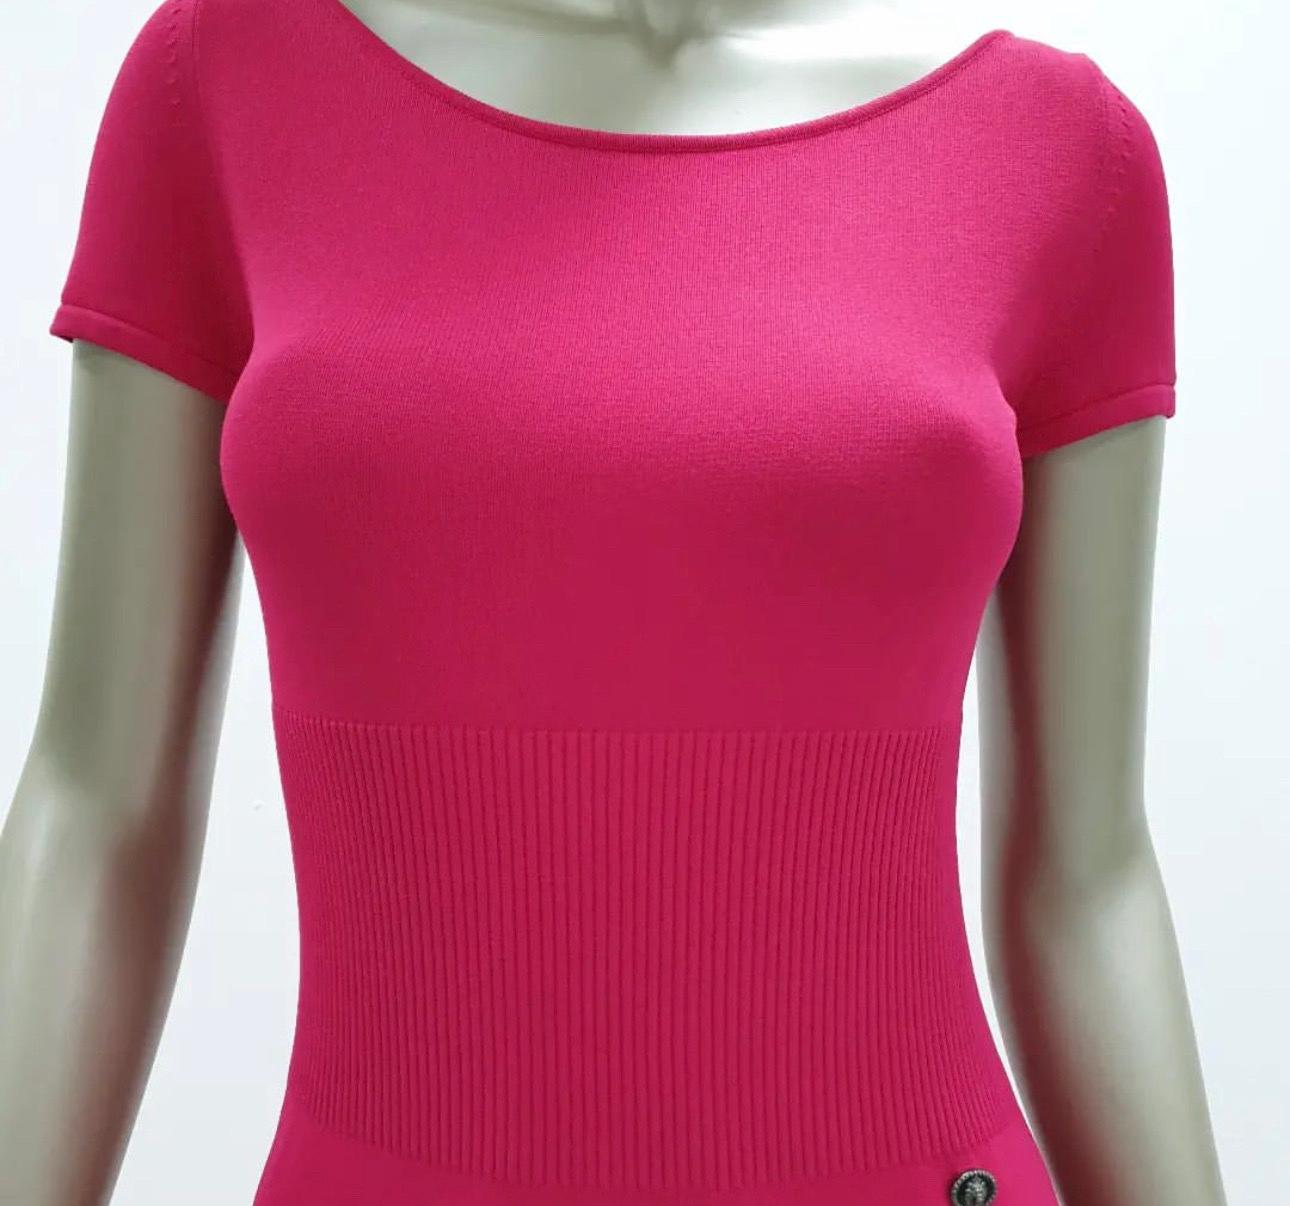 Chanel 2010 Pink Knit Midi Sweater Dress In Excellent Condition For Sale In Krakow, PL